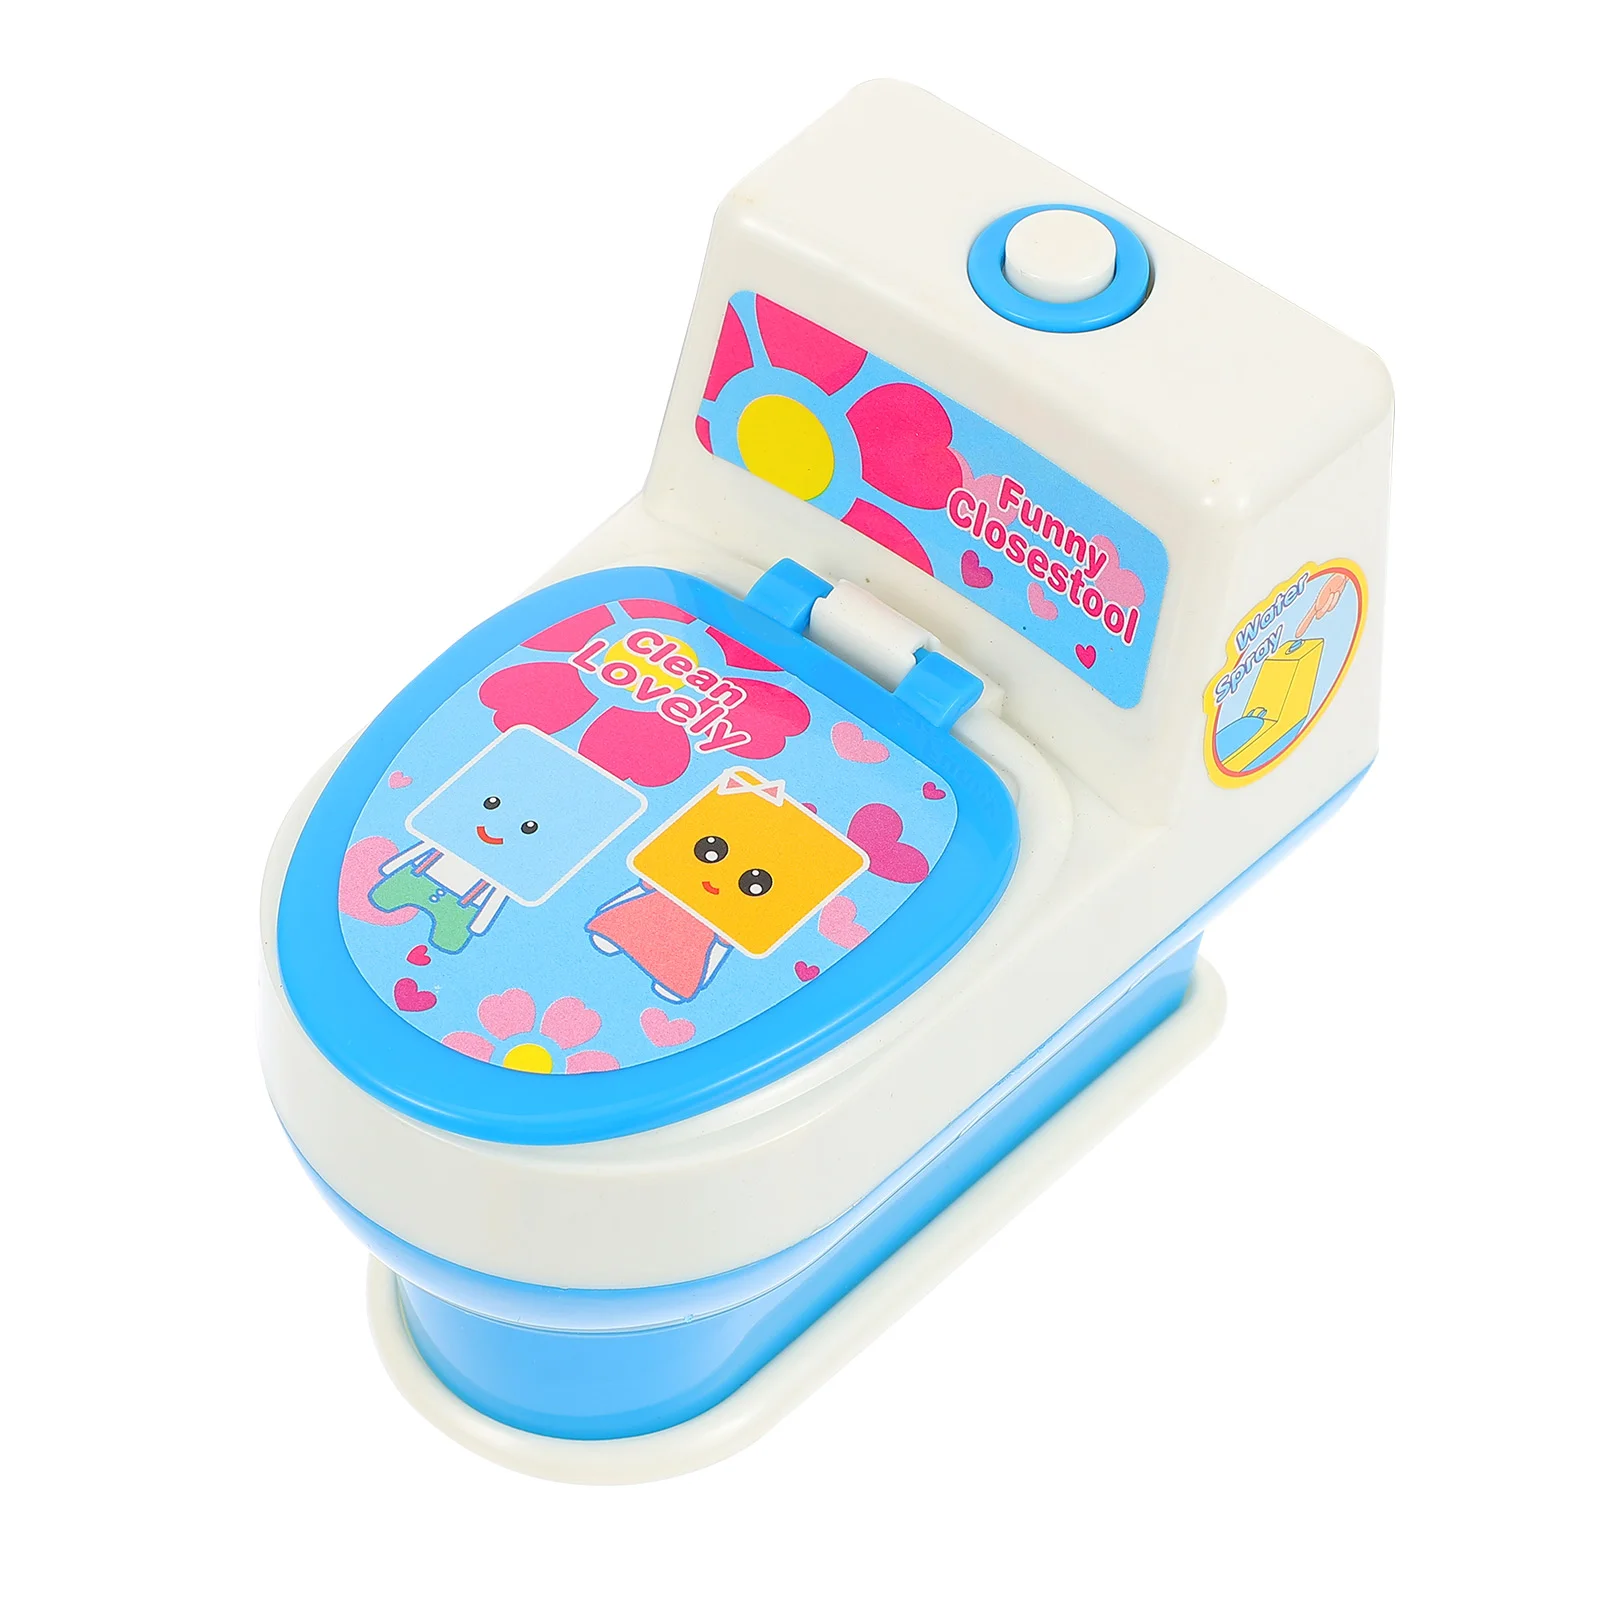 

Simulated Toilet Closestool Plaything for Child Playhouse Toy Educational Kids Gift Mini Fake Simulation Children’s Toys